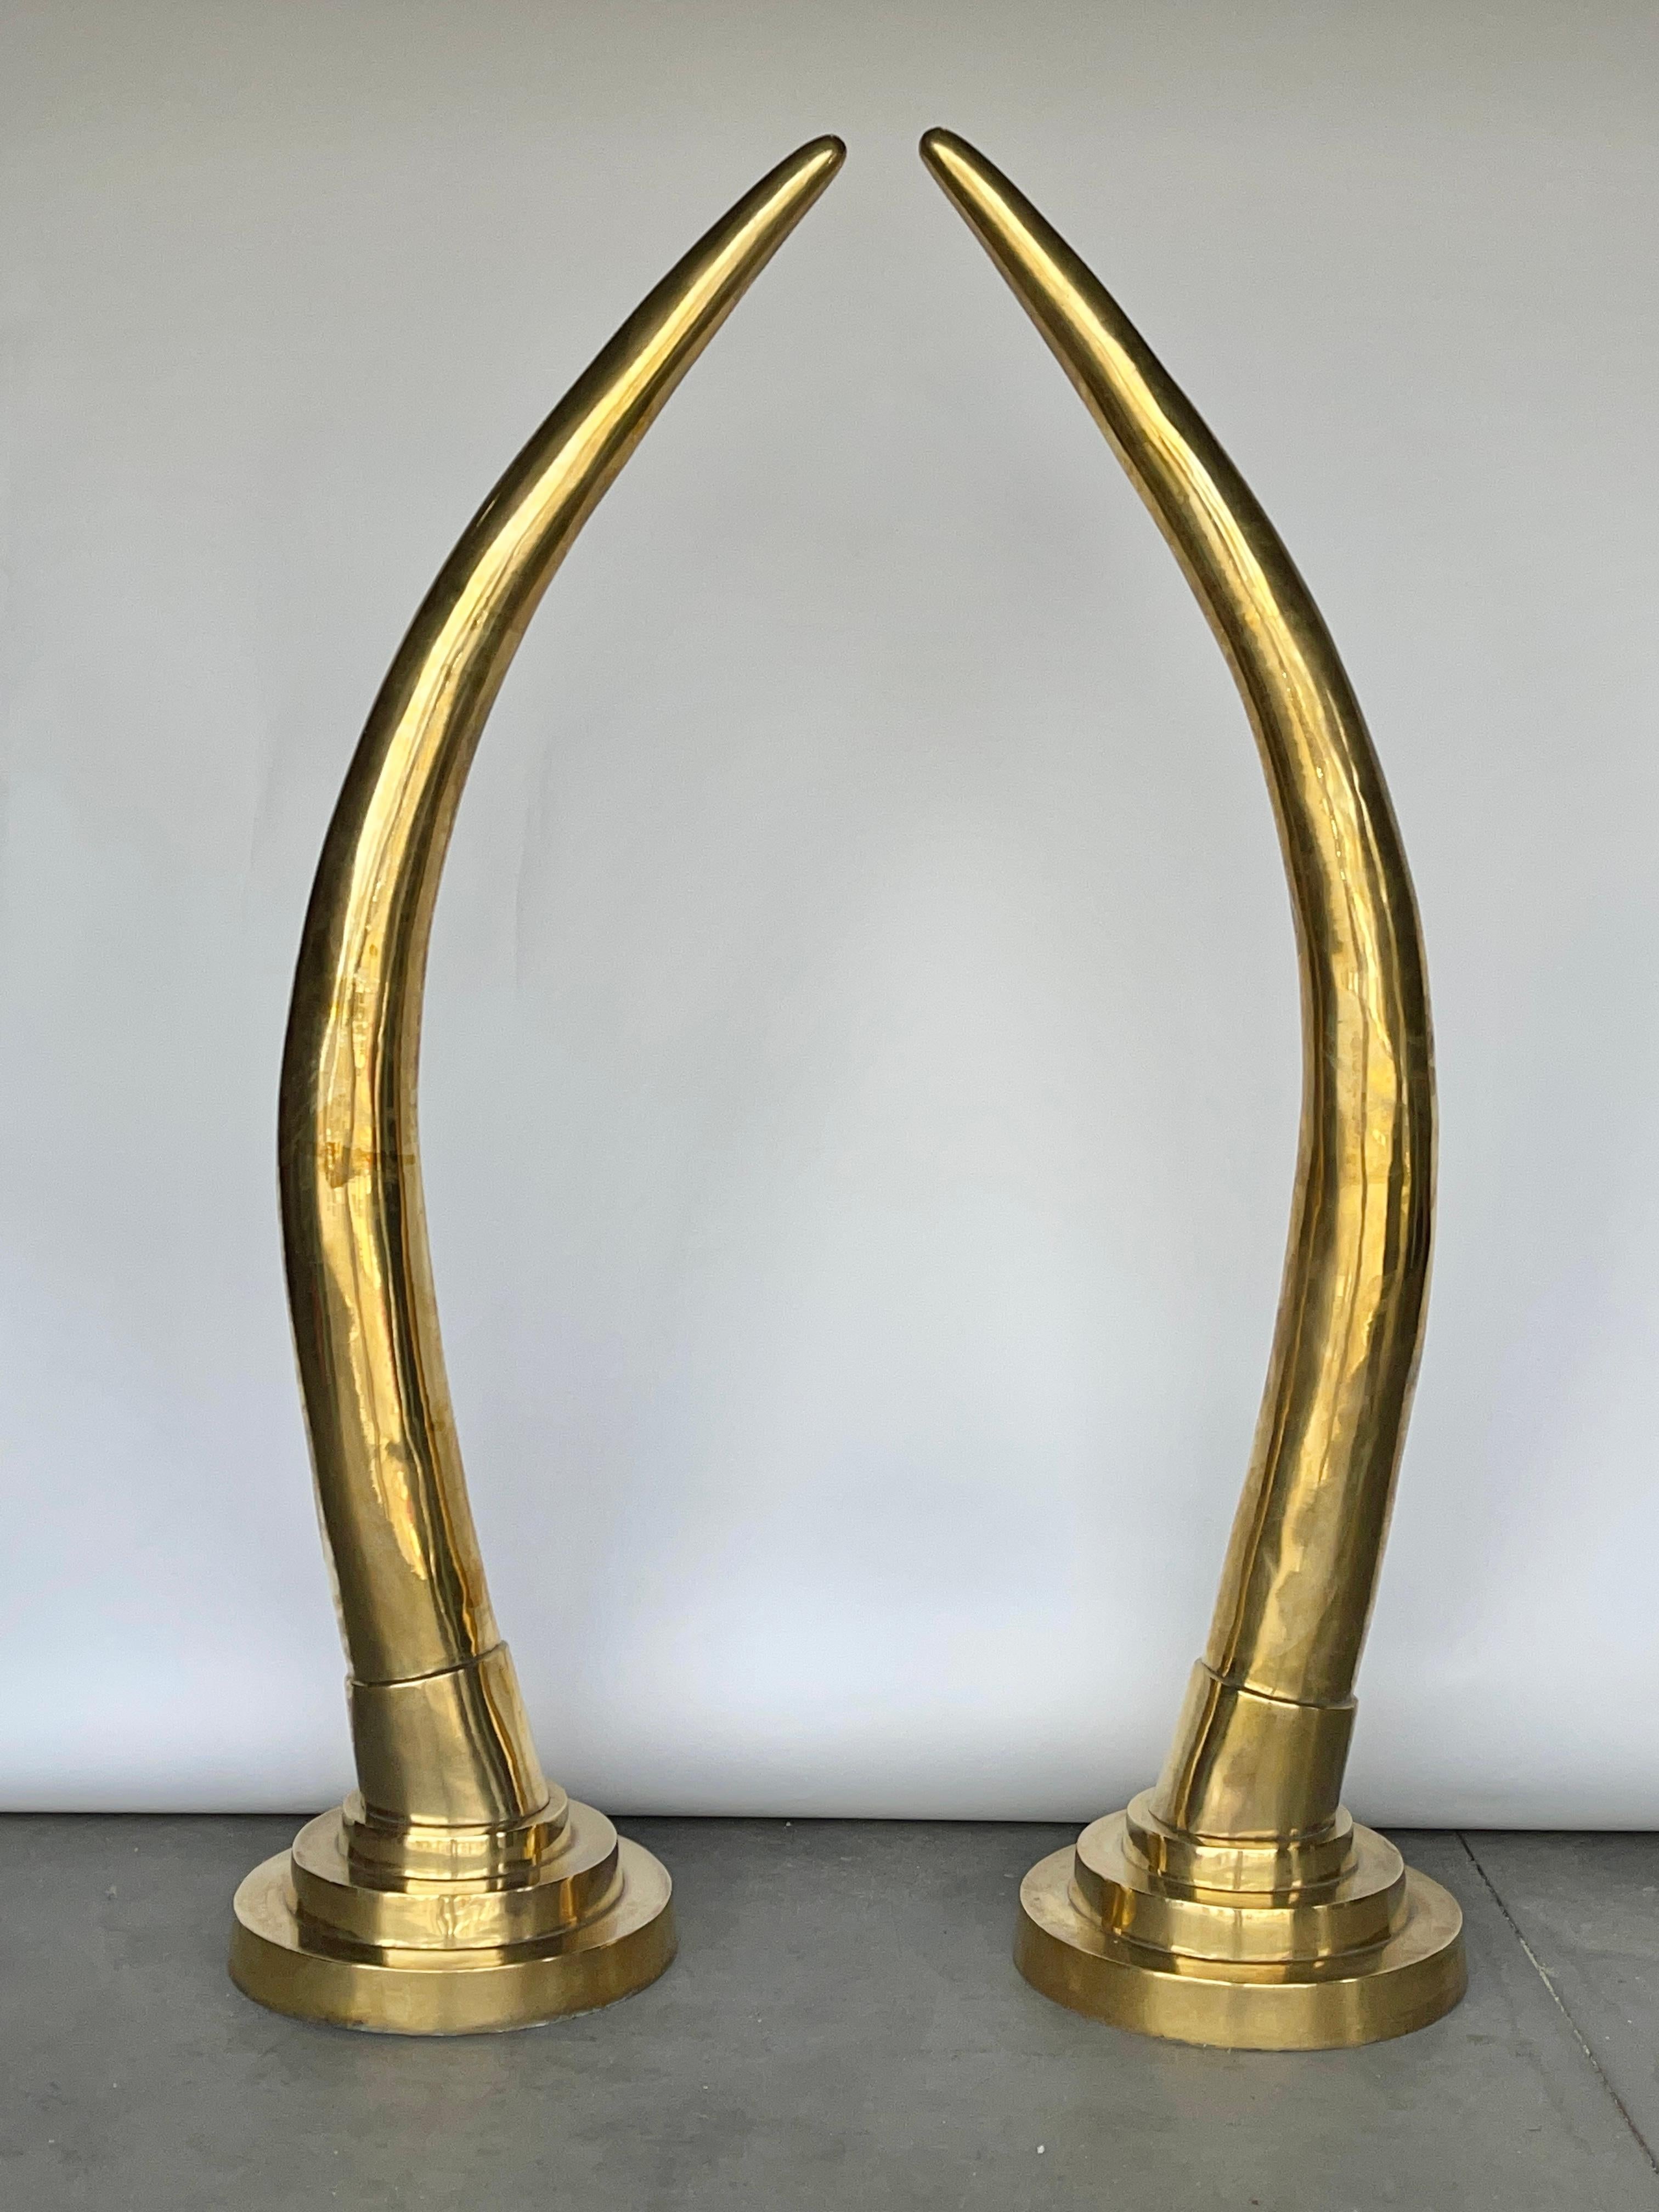 Monumental Pair of Polished Brass Faux Tusks For Sale 6